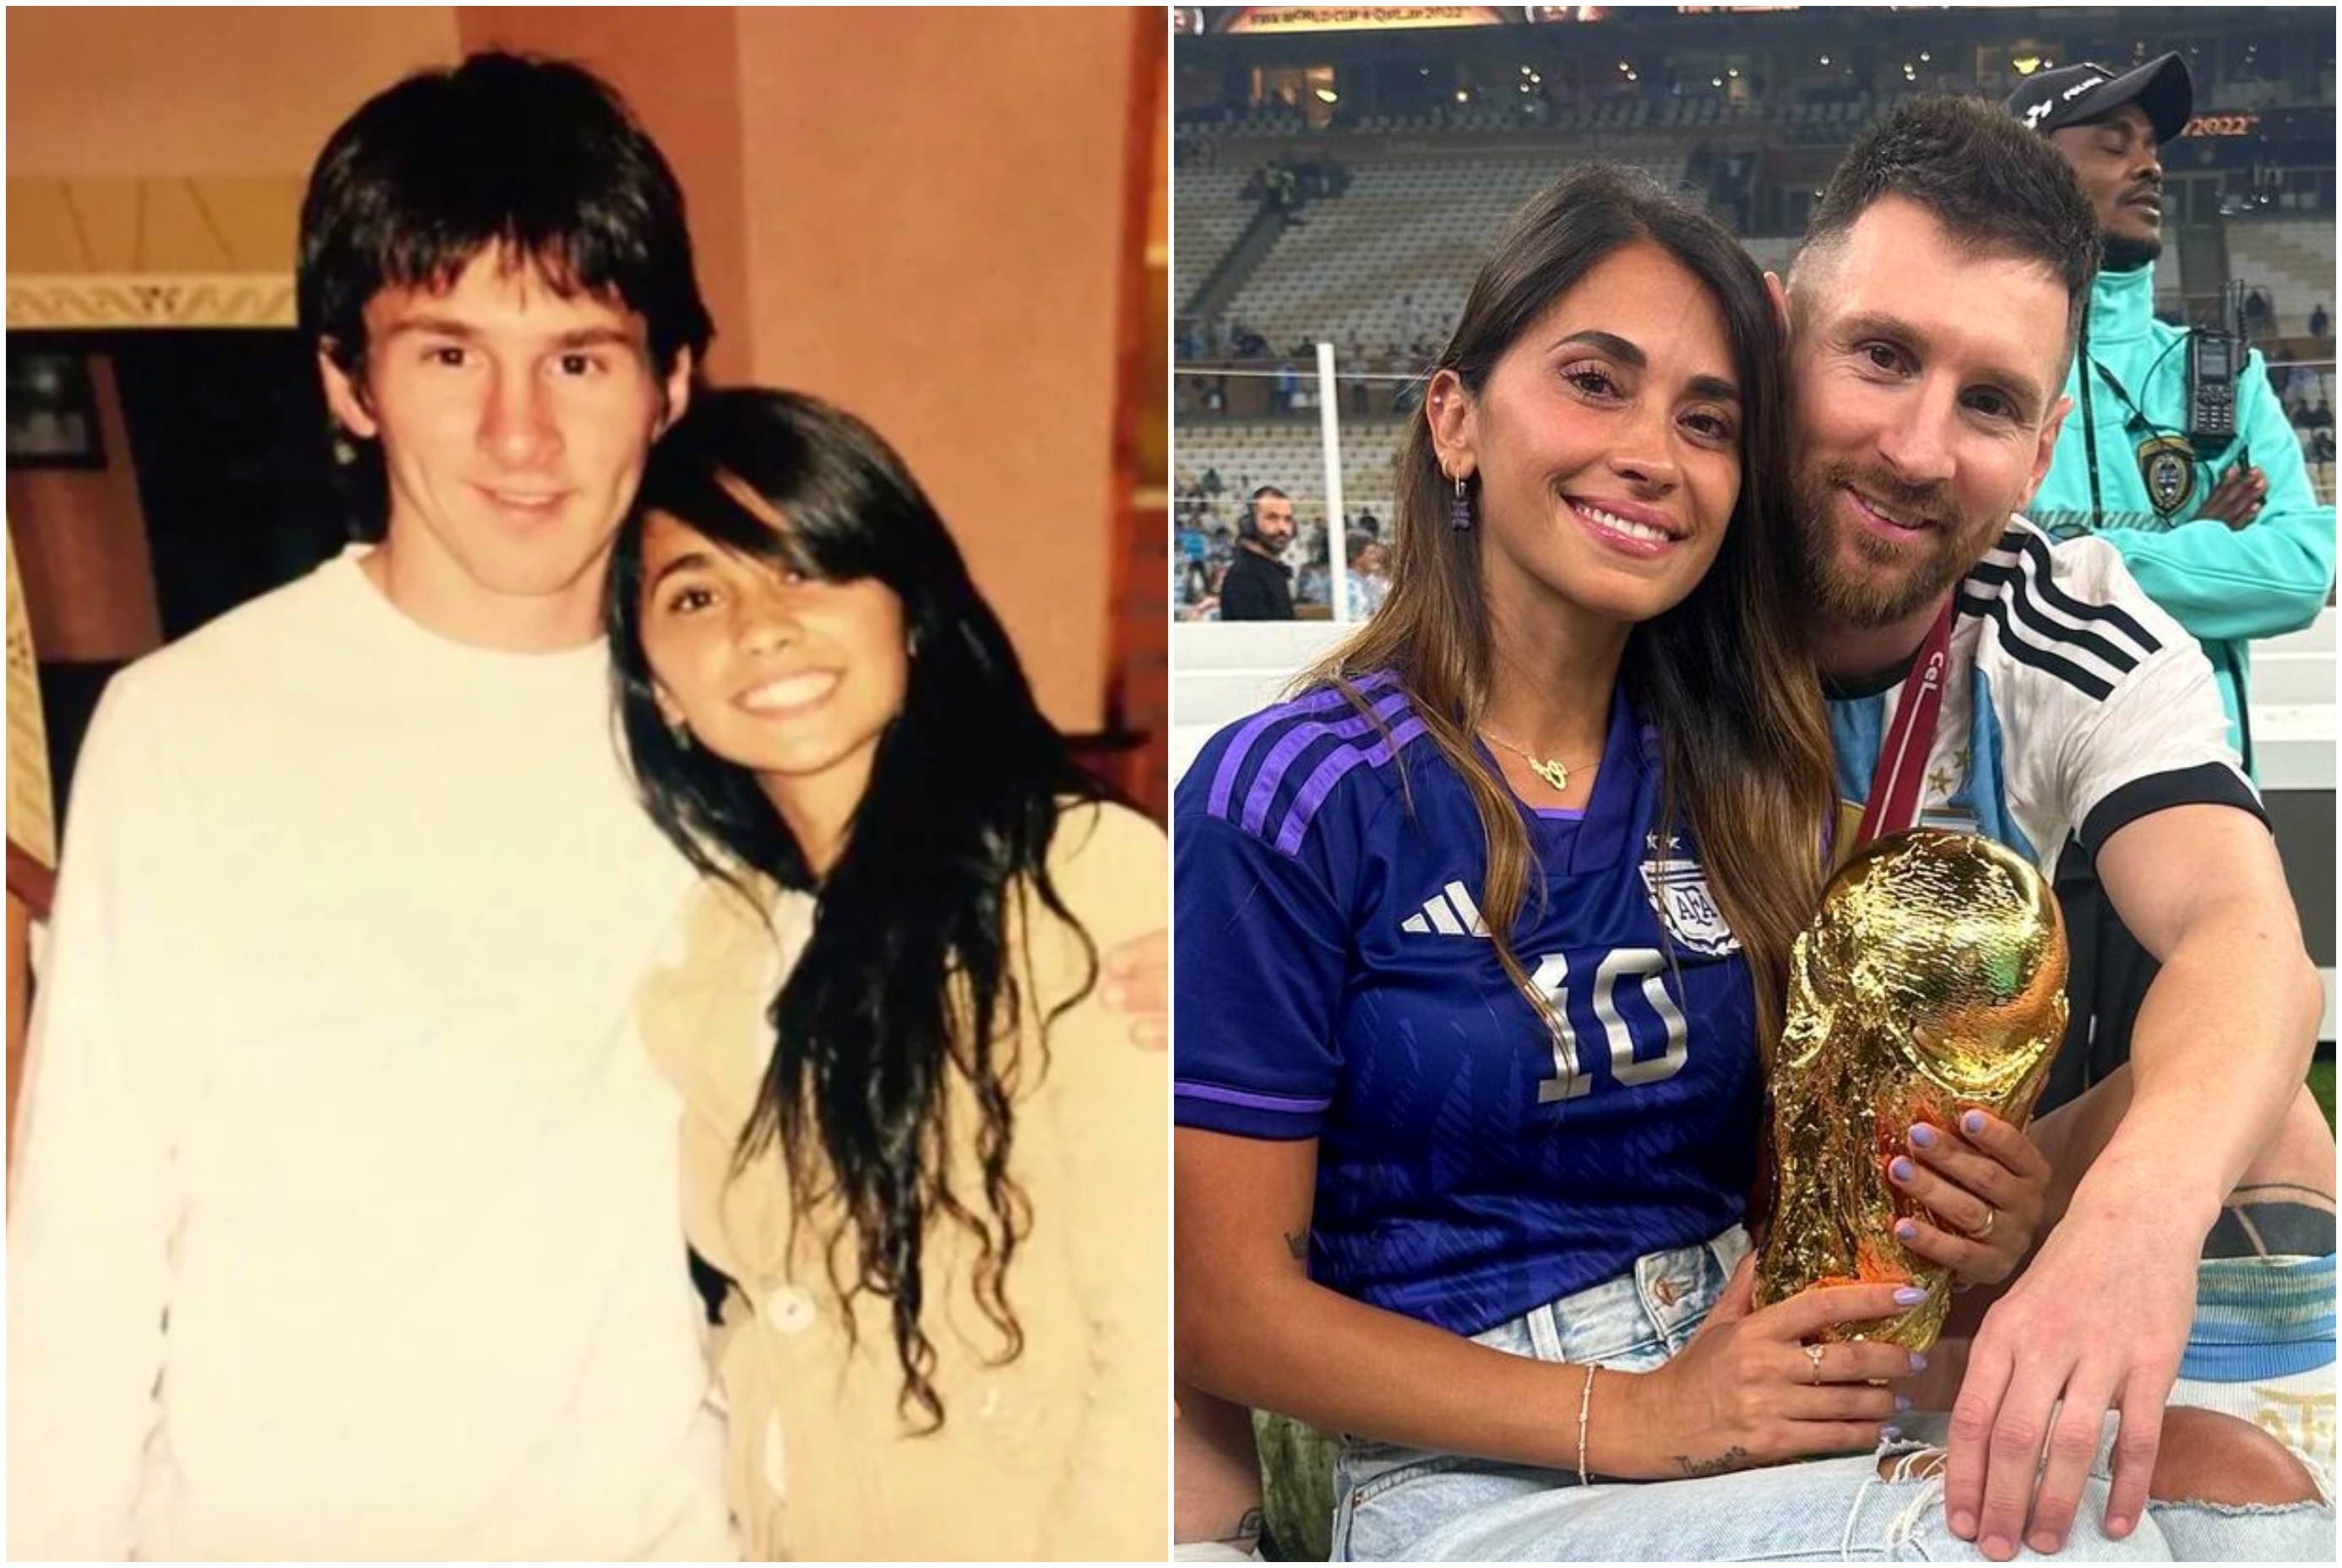 GOAT: Messi, Antonela and a love story for the ages